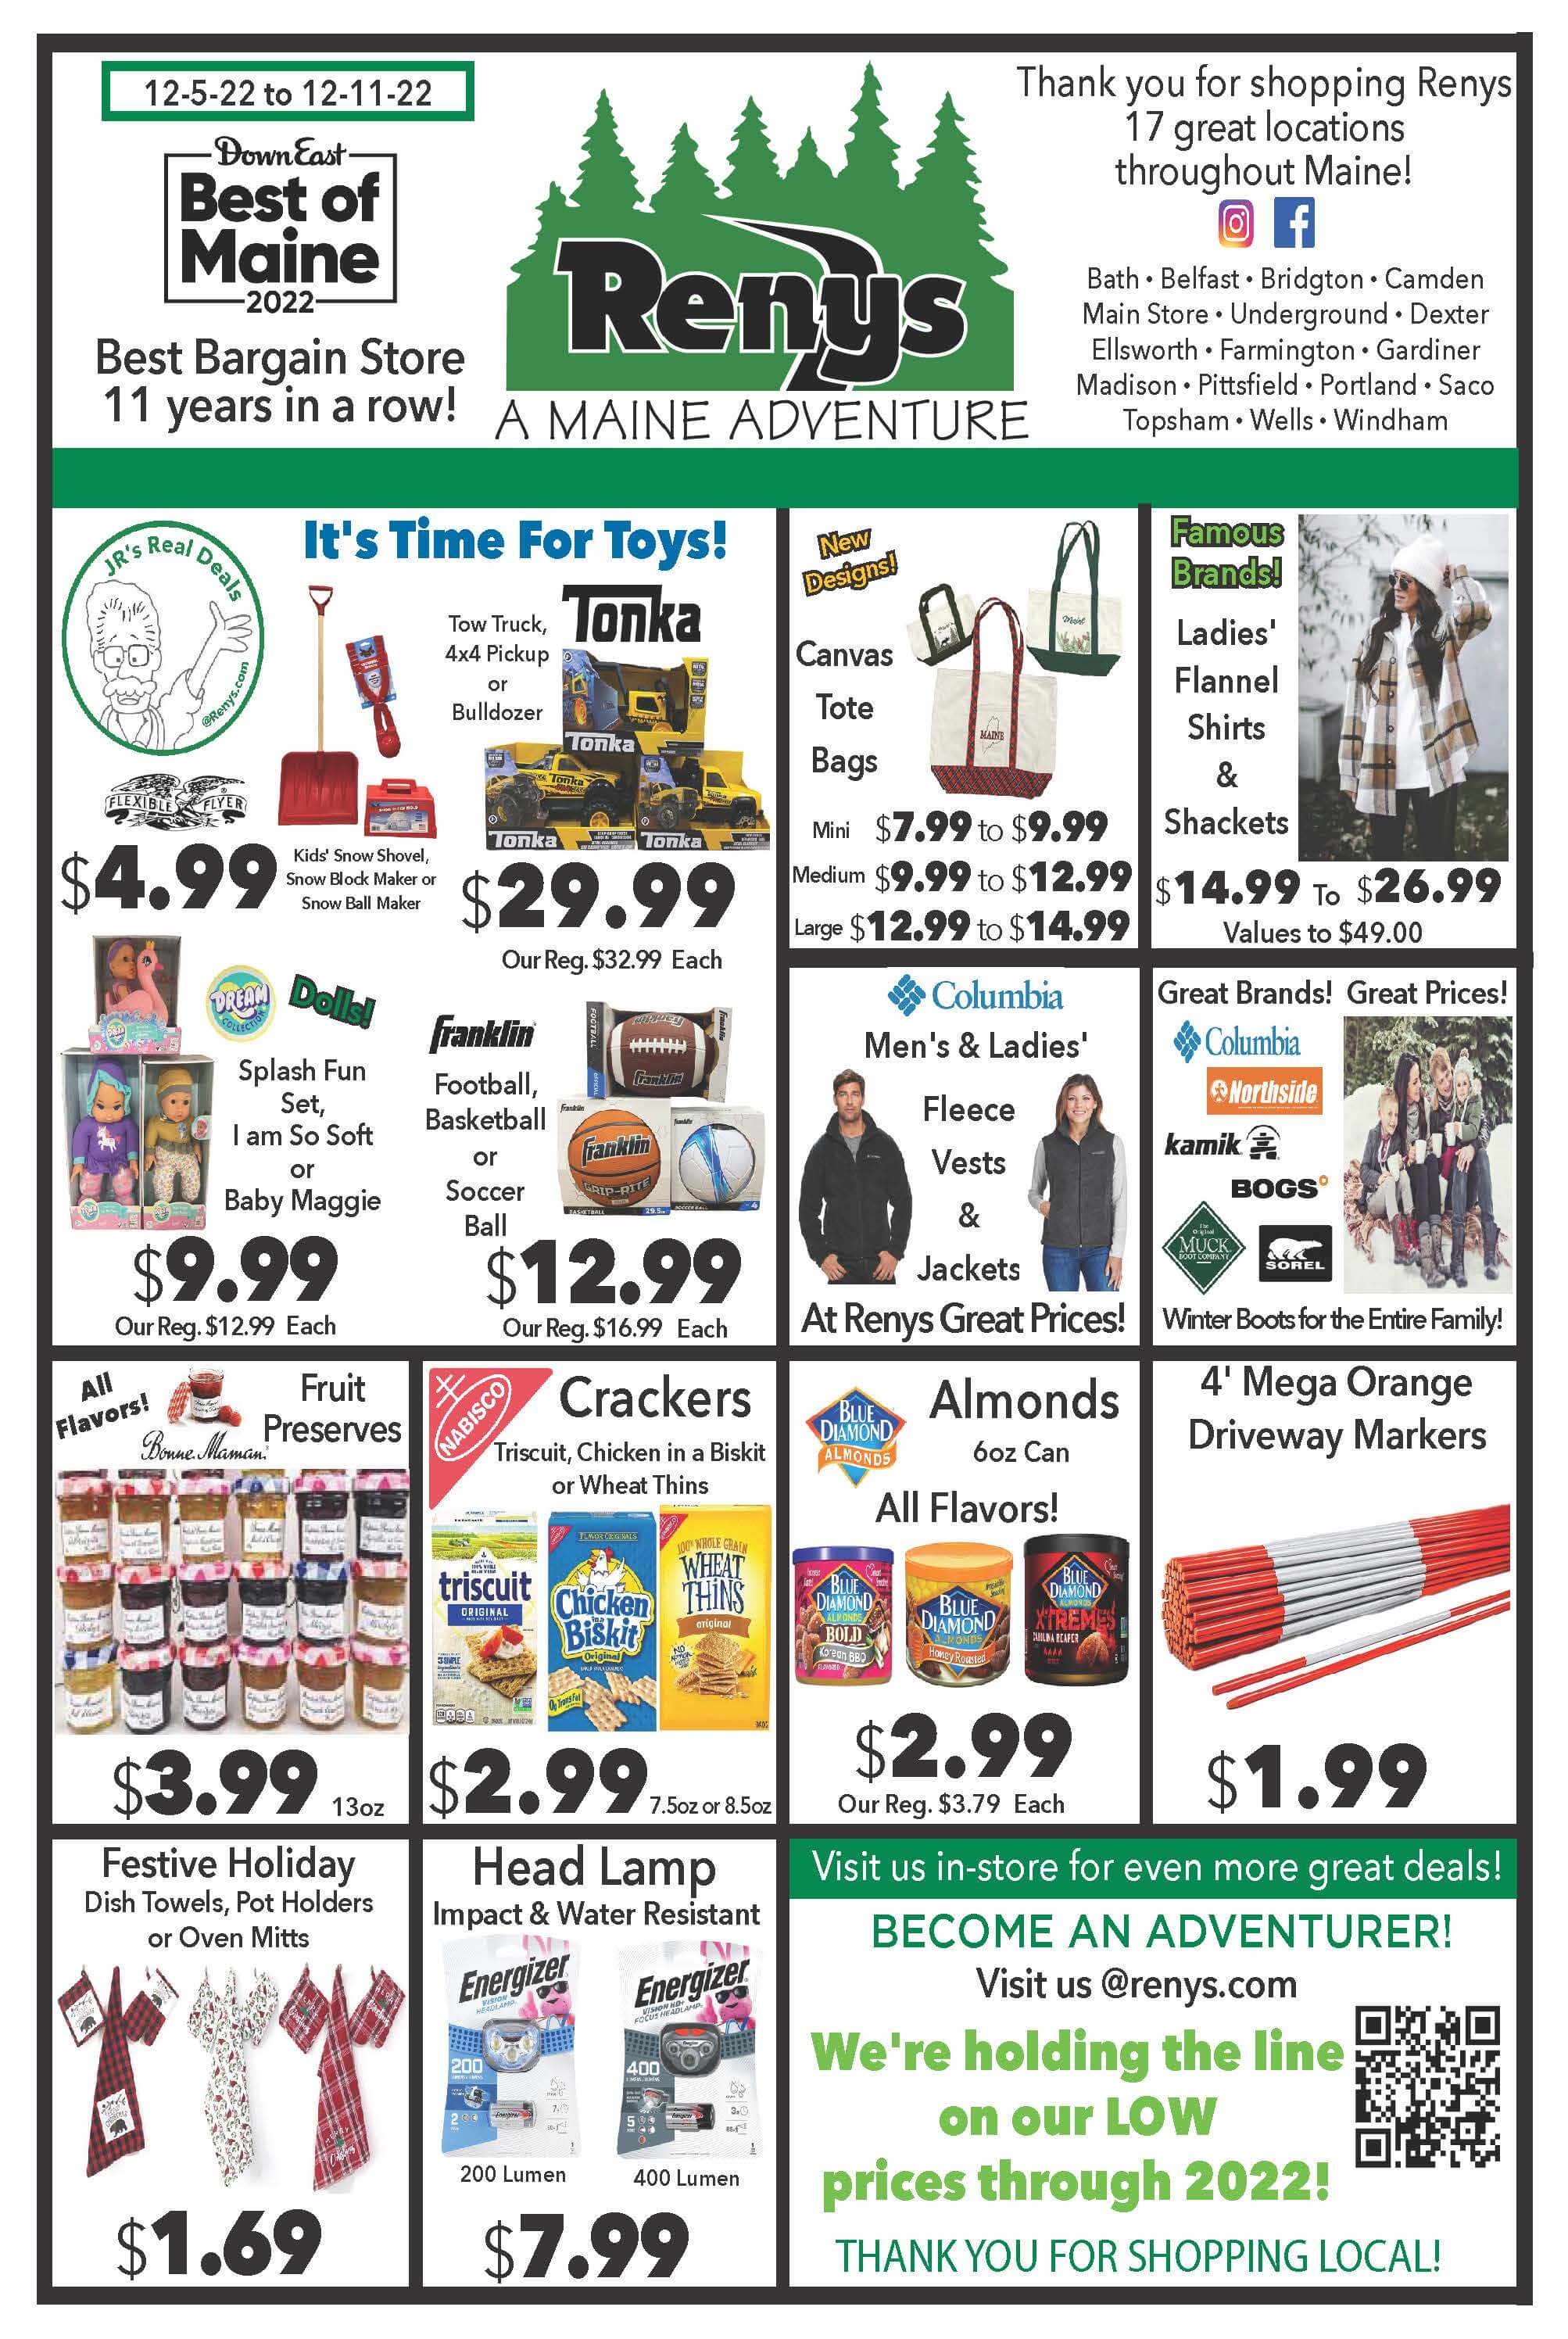 12/5/22 - 12/11/22 Weekly Flyer